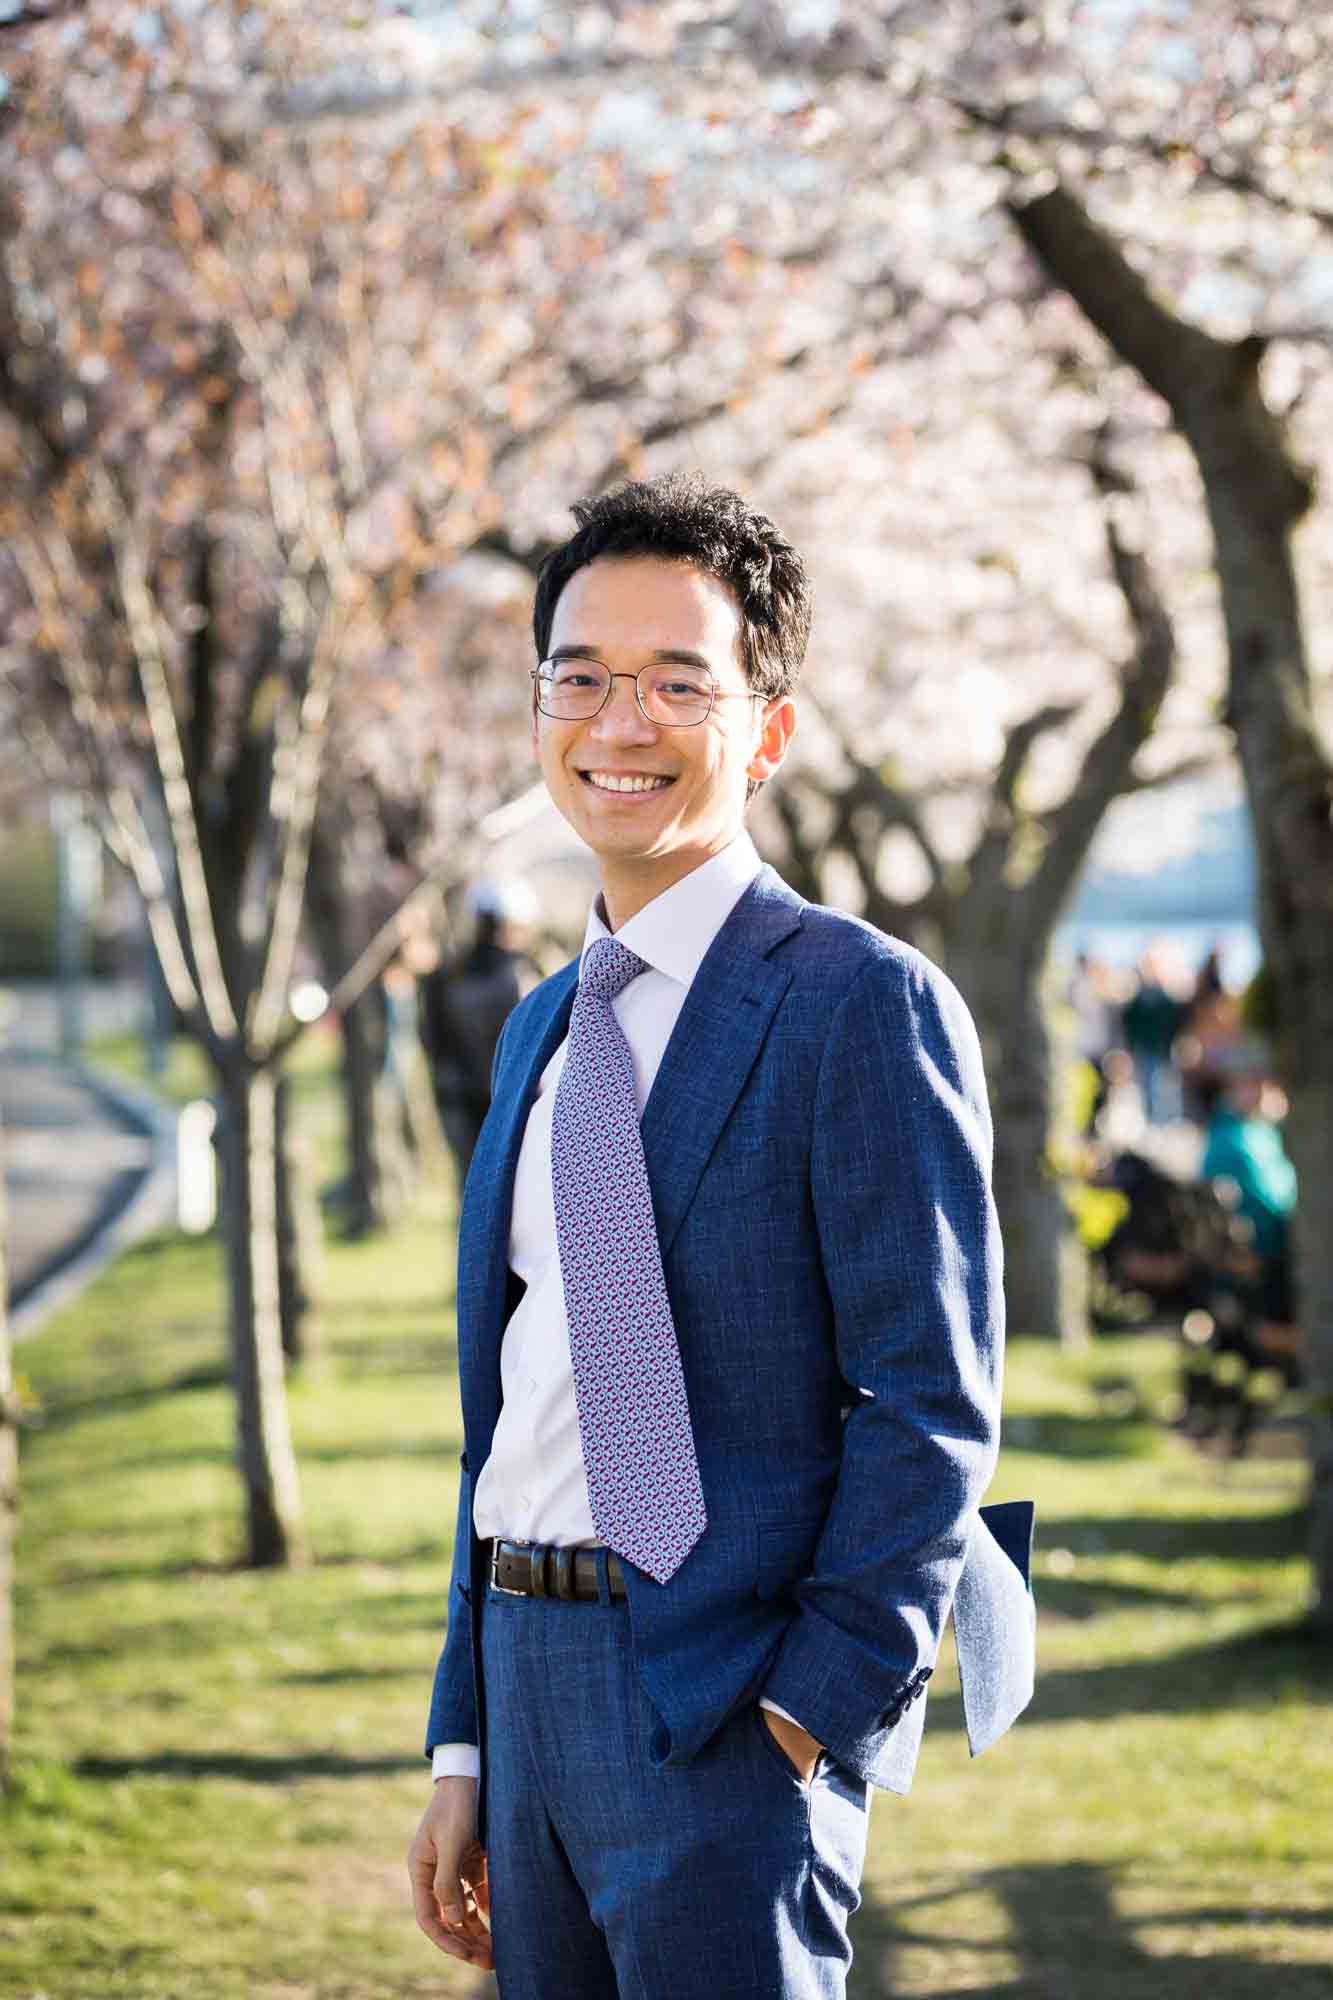 Man wearing blue suit and blue tie in front of cherry blossom trees Couple walking under cherry blossom trees during a Roosevelt Island engagement photo shoot